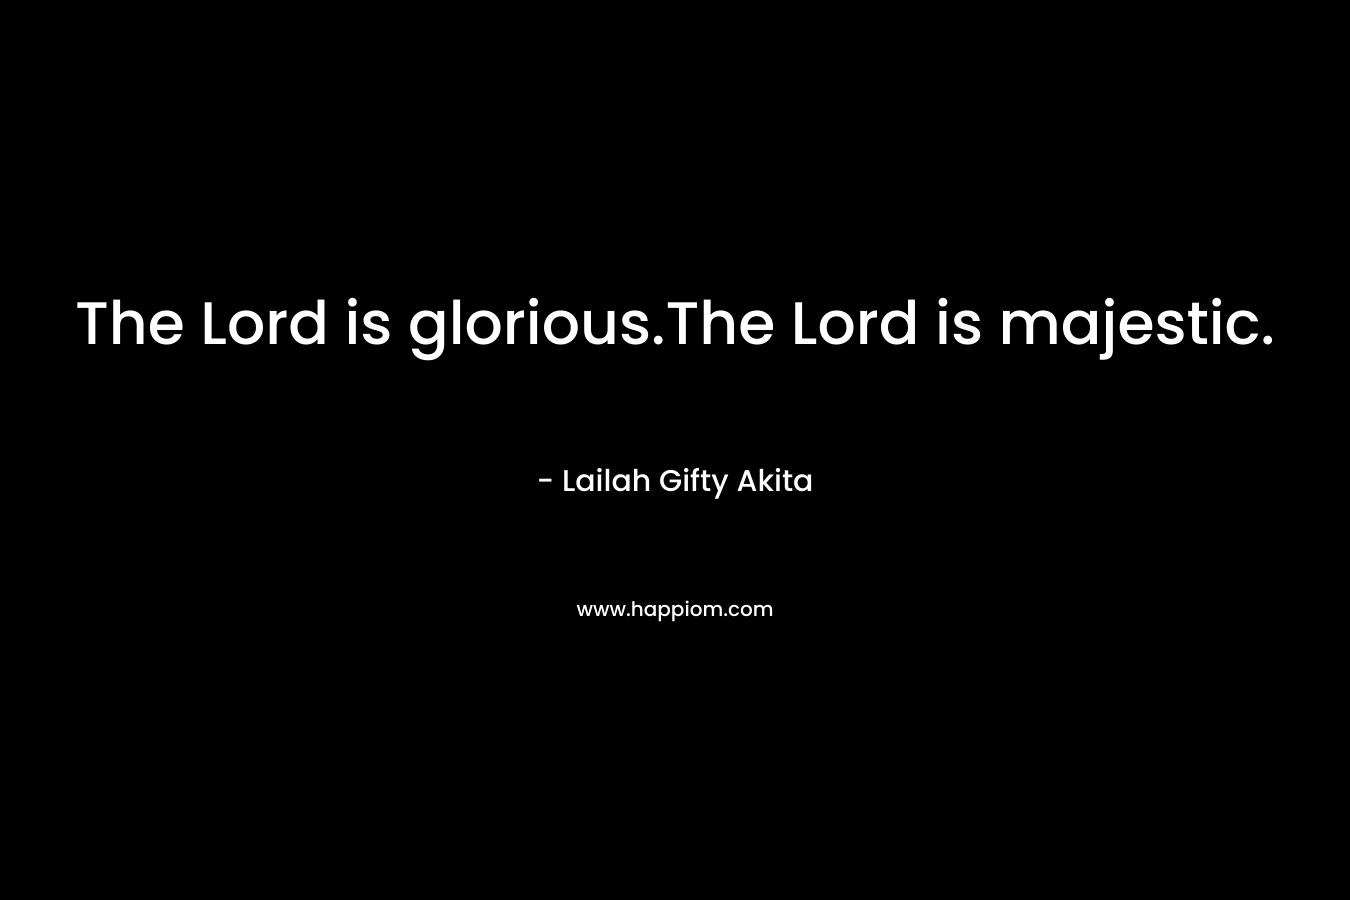 The Lord is glorious.The Lord is majestic.